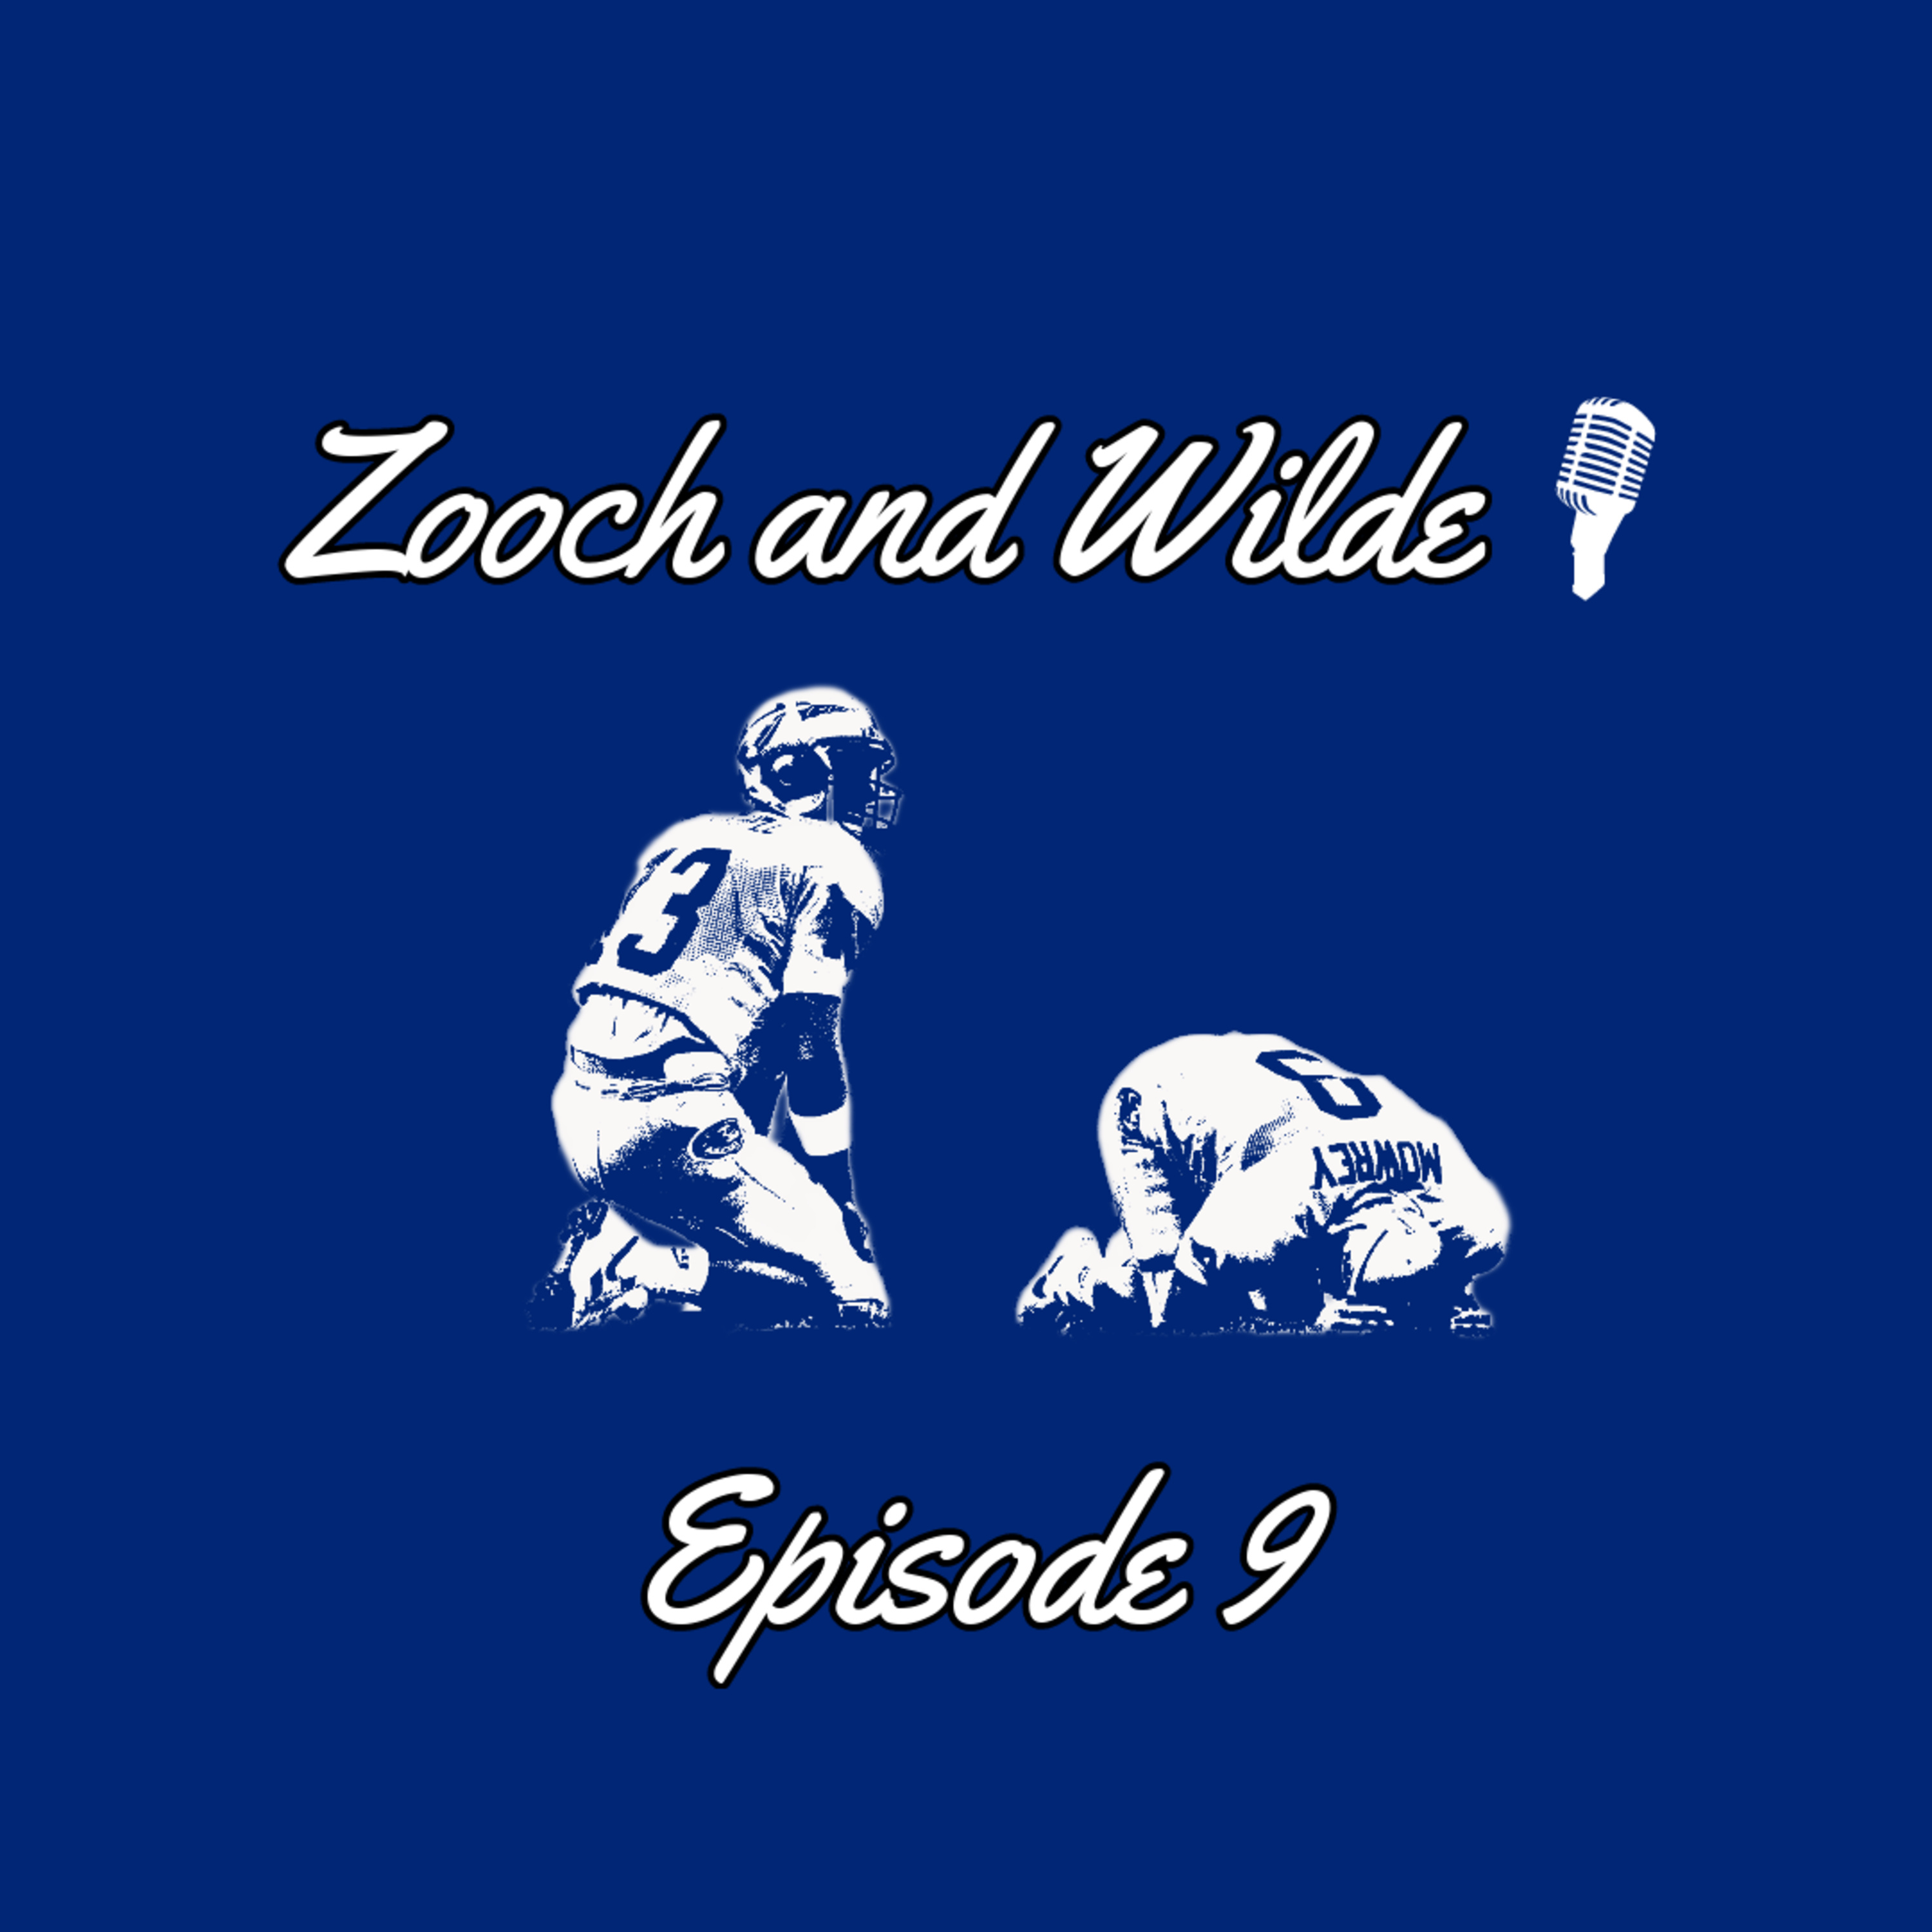 Zooch and Wilde Episode 9: Big Vol Daddy Bowl Tennessee vs. Alabama